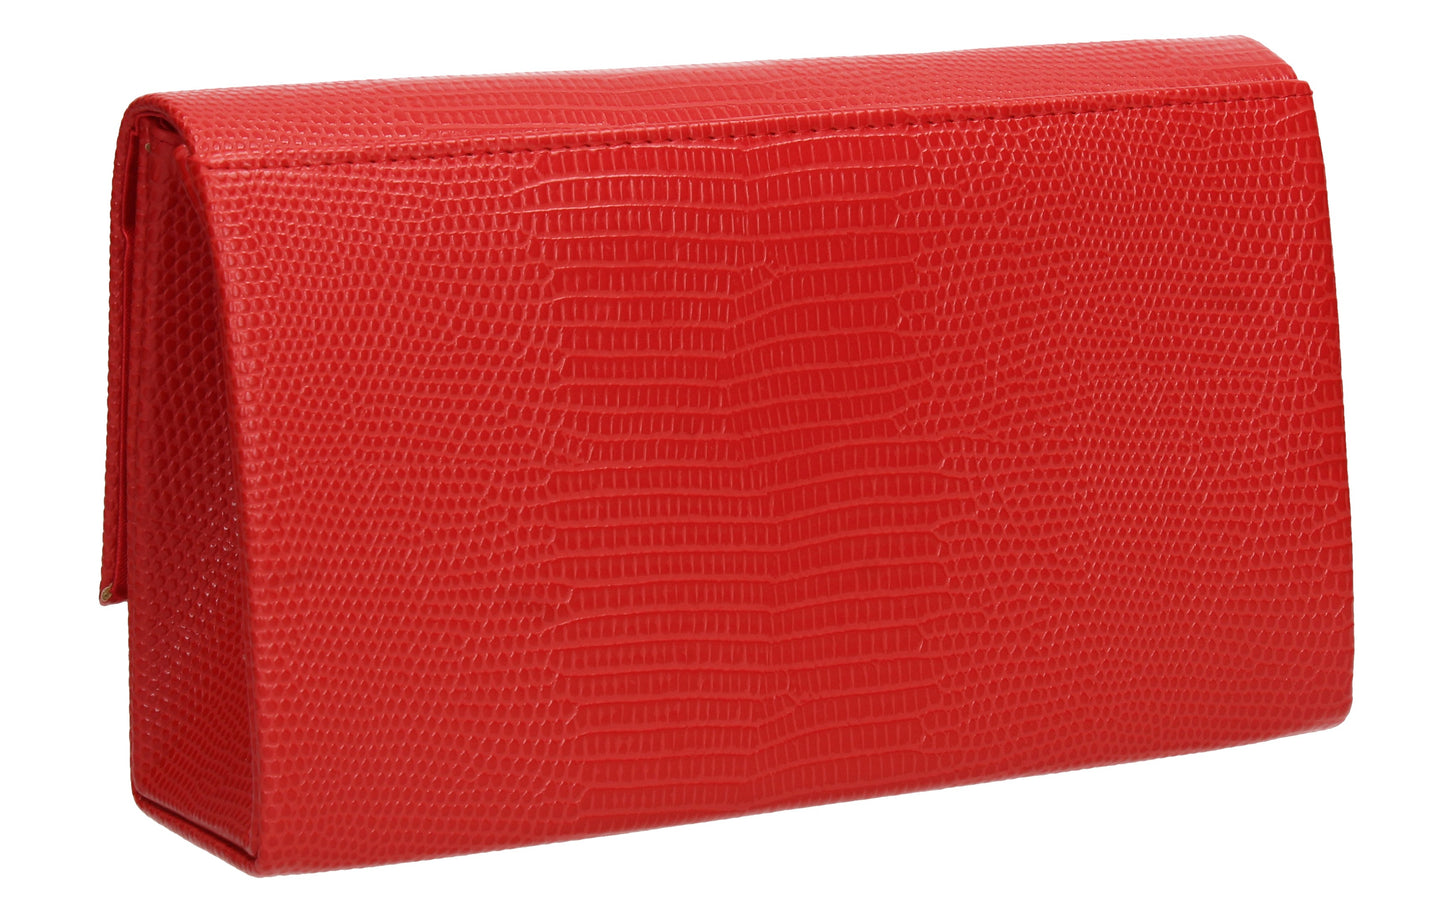 Tana Faux Leather Animal Style Clutch Bag Red